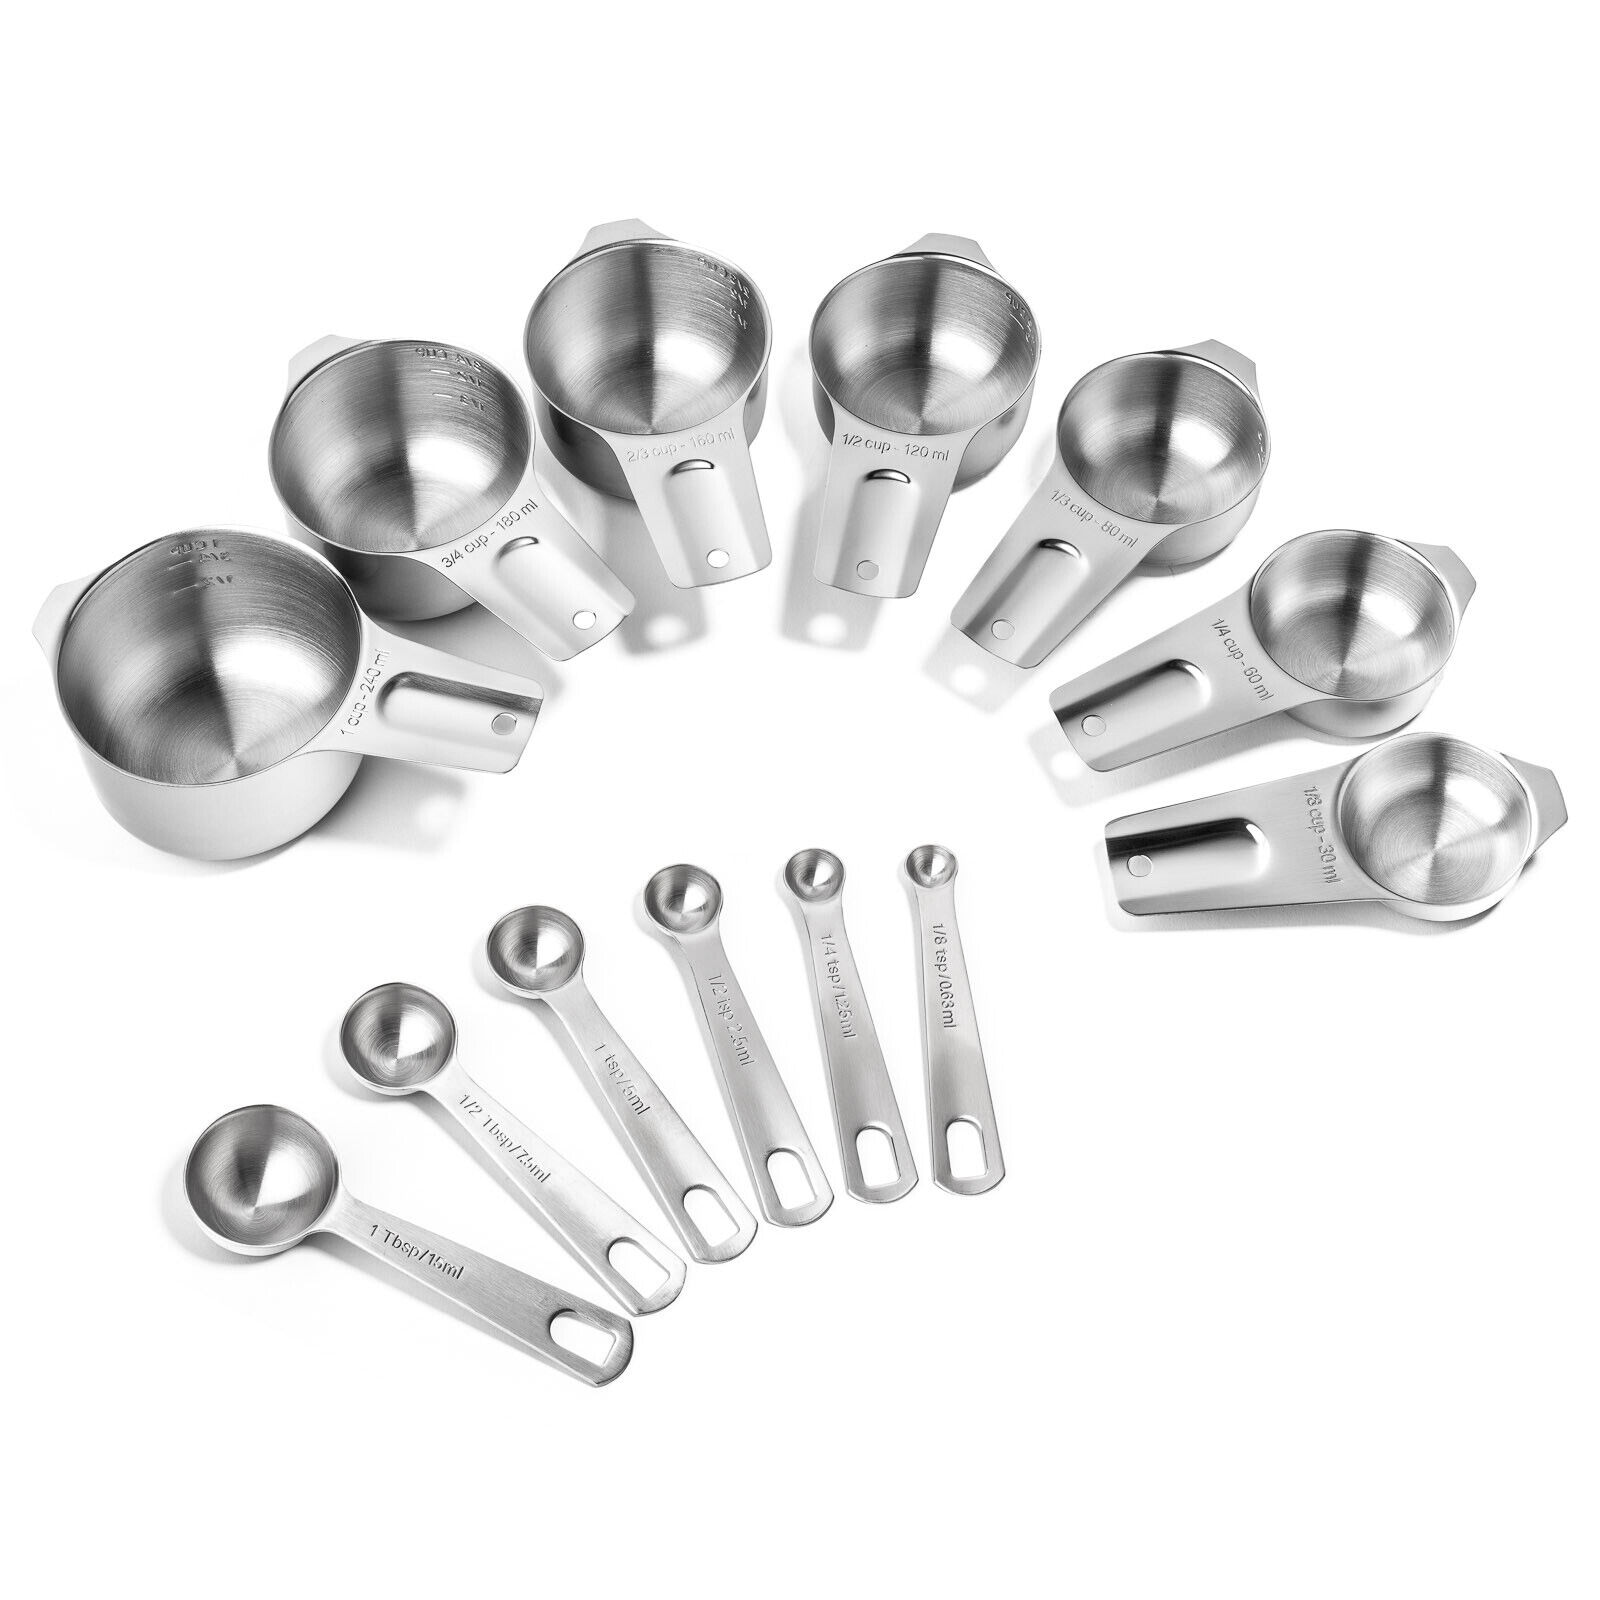 Measuring Cup Kit - Stainless Steel - 1/4 Cup, 1/3 Cup, 1/2 Cup